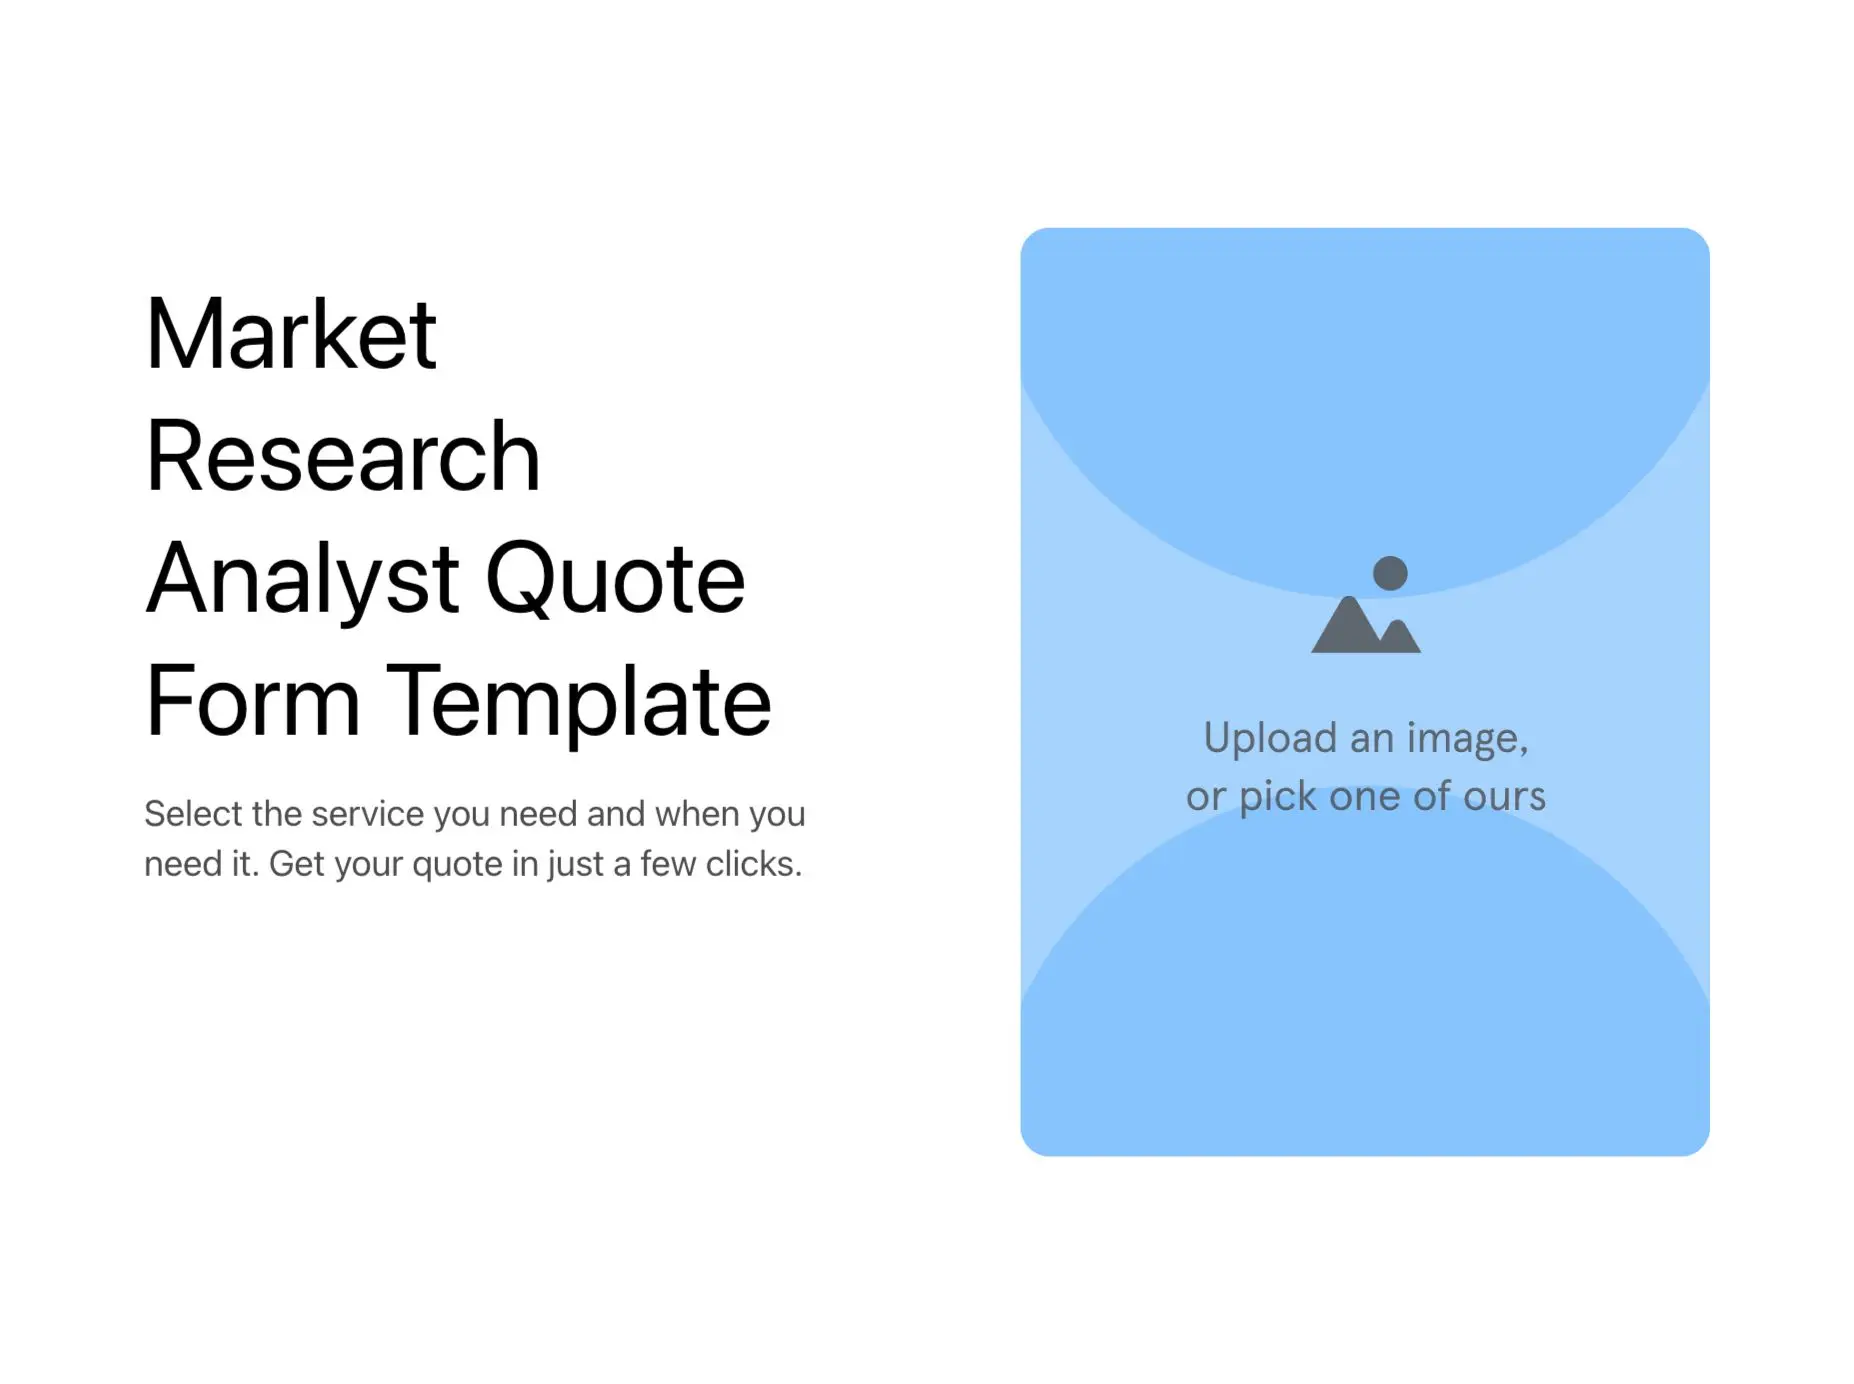 Market Research Analyst Quote Form Template Hero